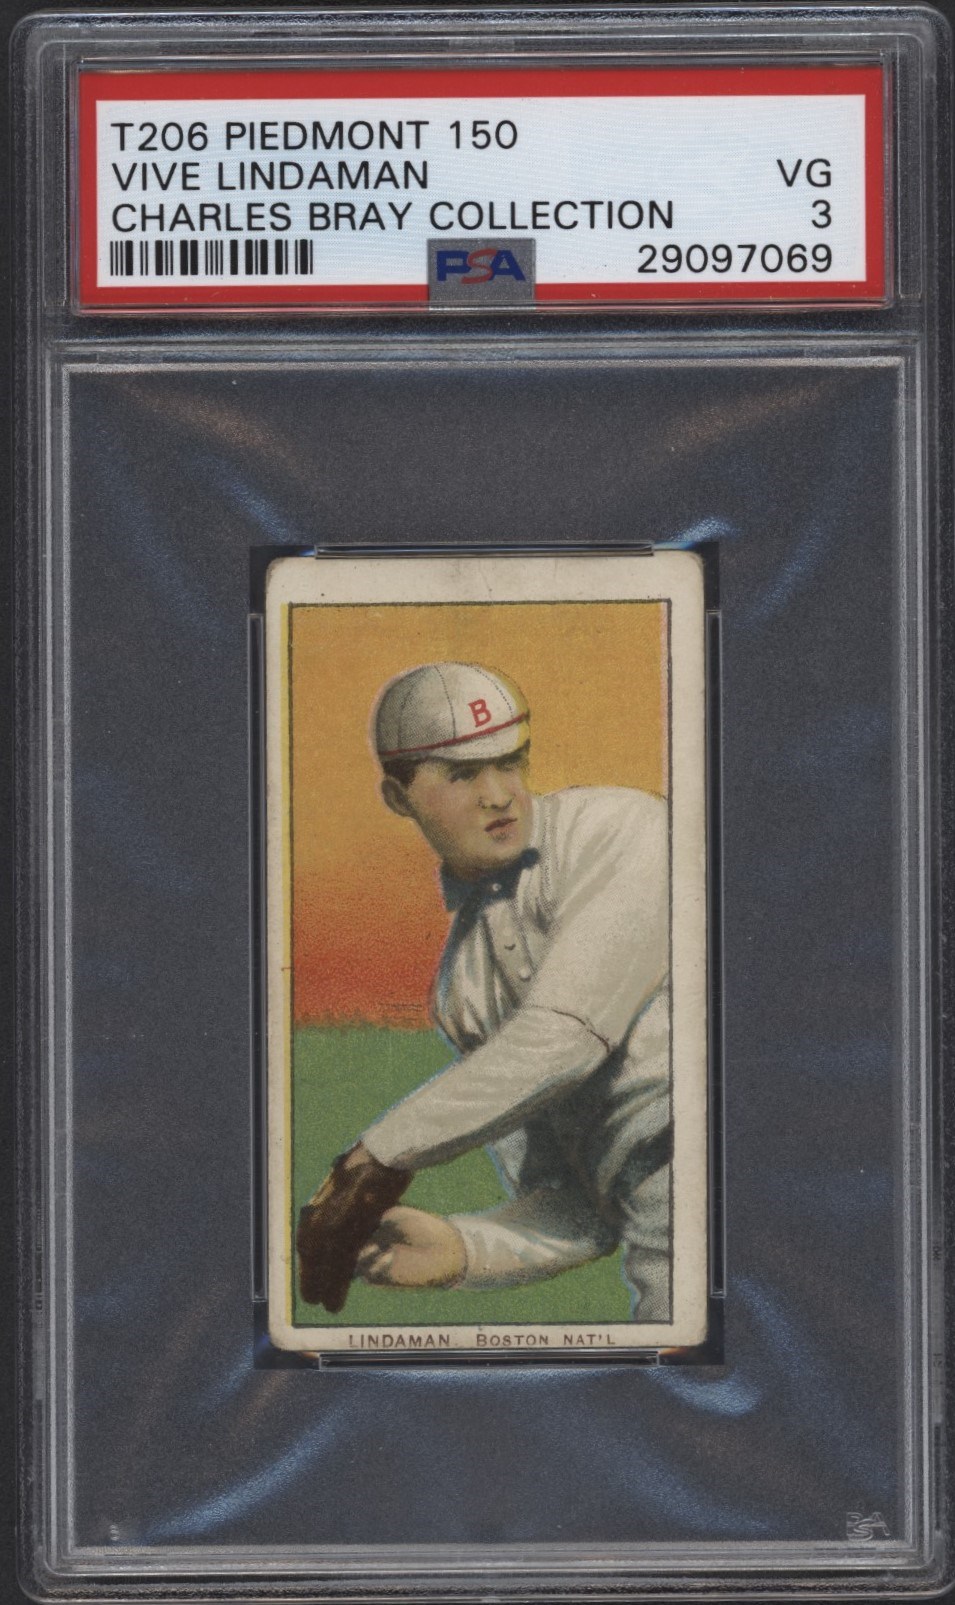 T206 Piedmont 150 Vive Lindaman PSA 3 From the Charles Bray Collection